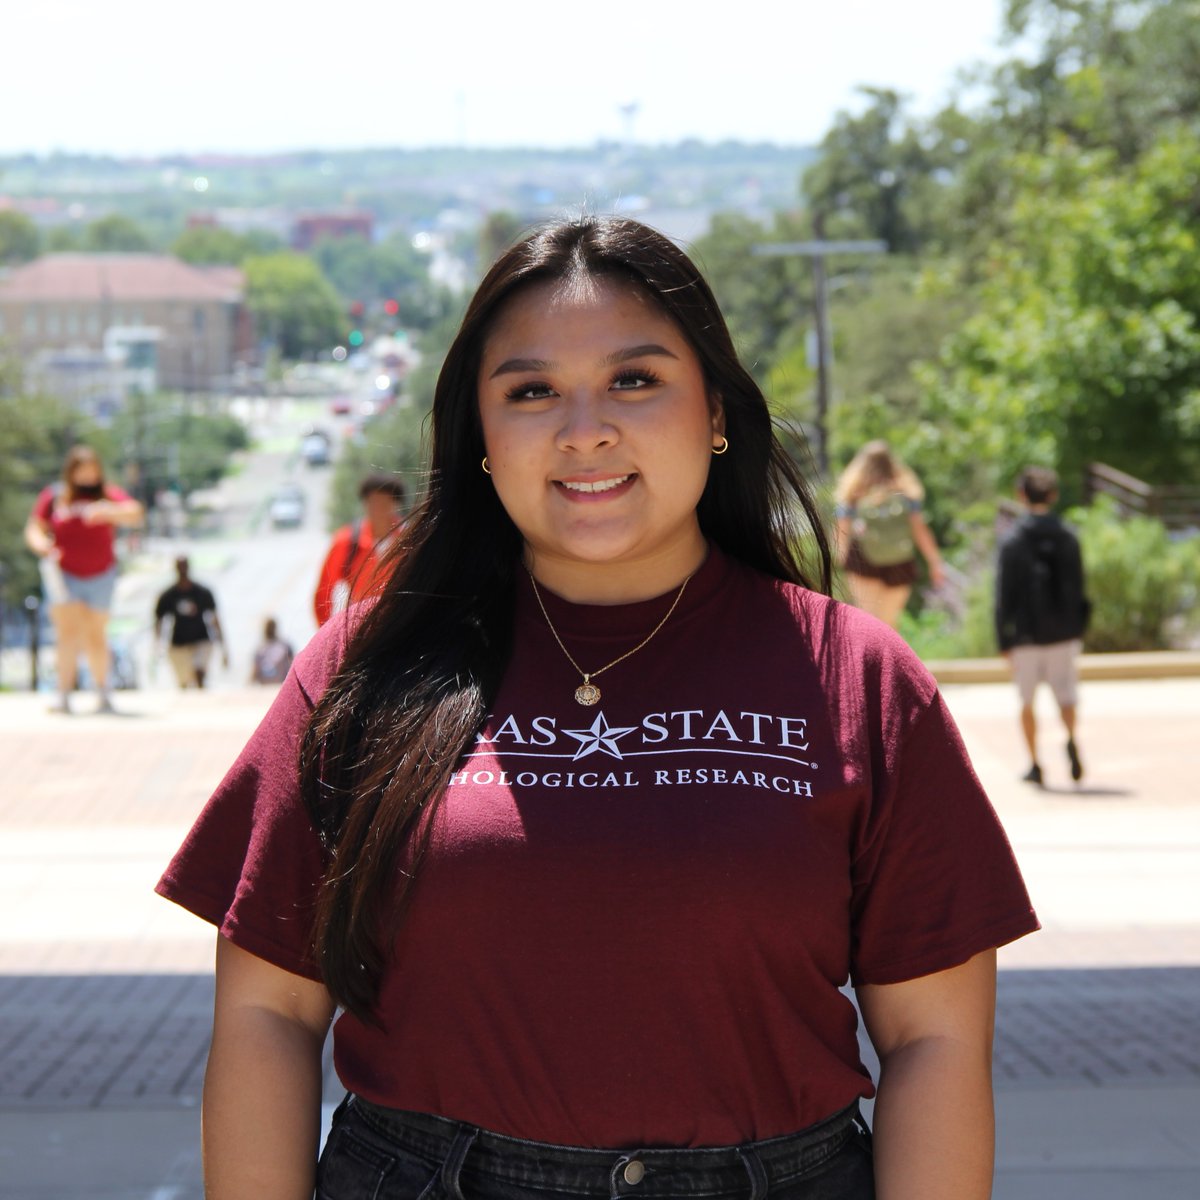 Congrats to MAPR student Lin Tran who won a $1500 travel award to present research at the National Hispanic Science Network in Washington D.C. @sccaerab @txstla @theNHSN